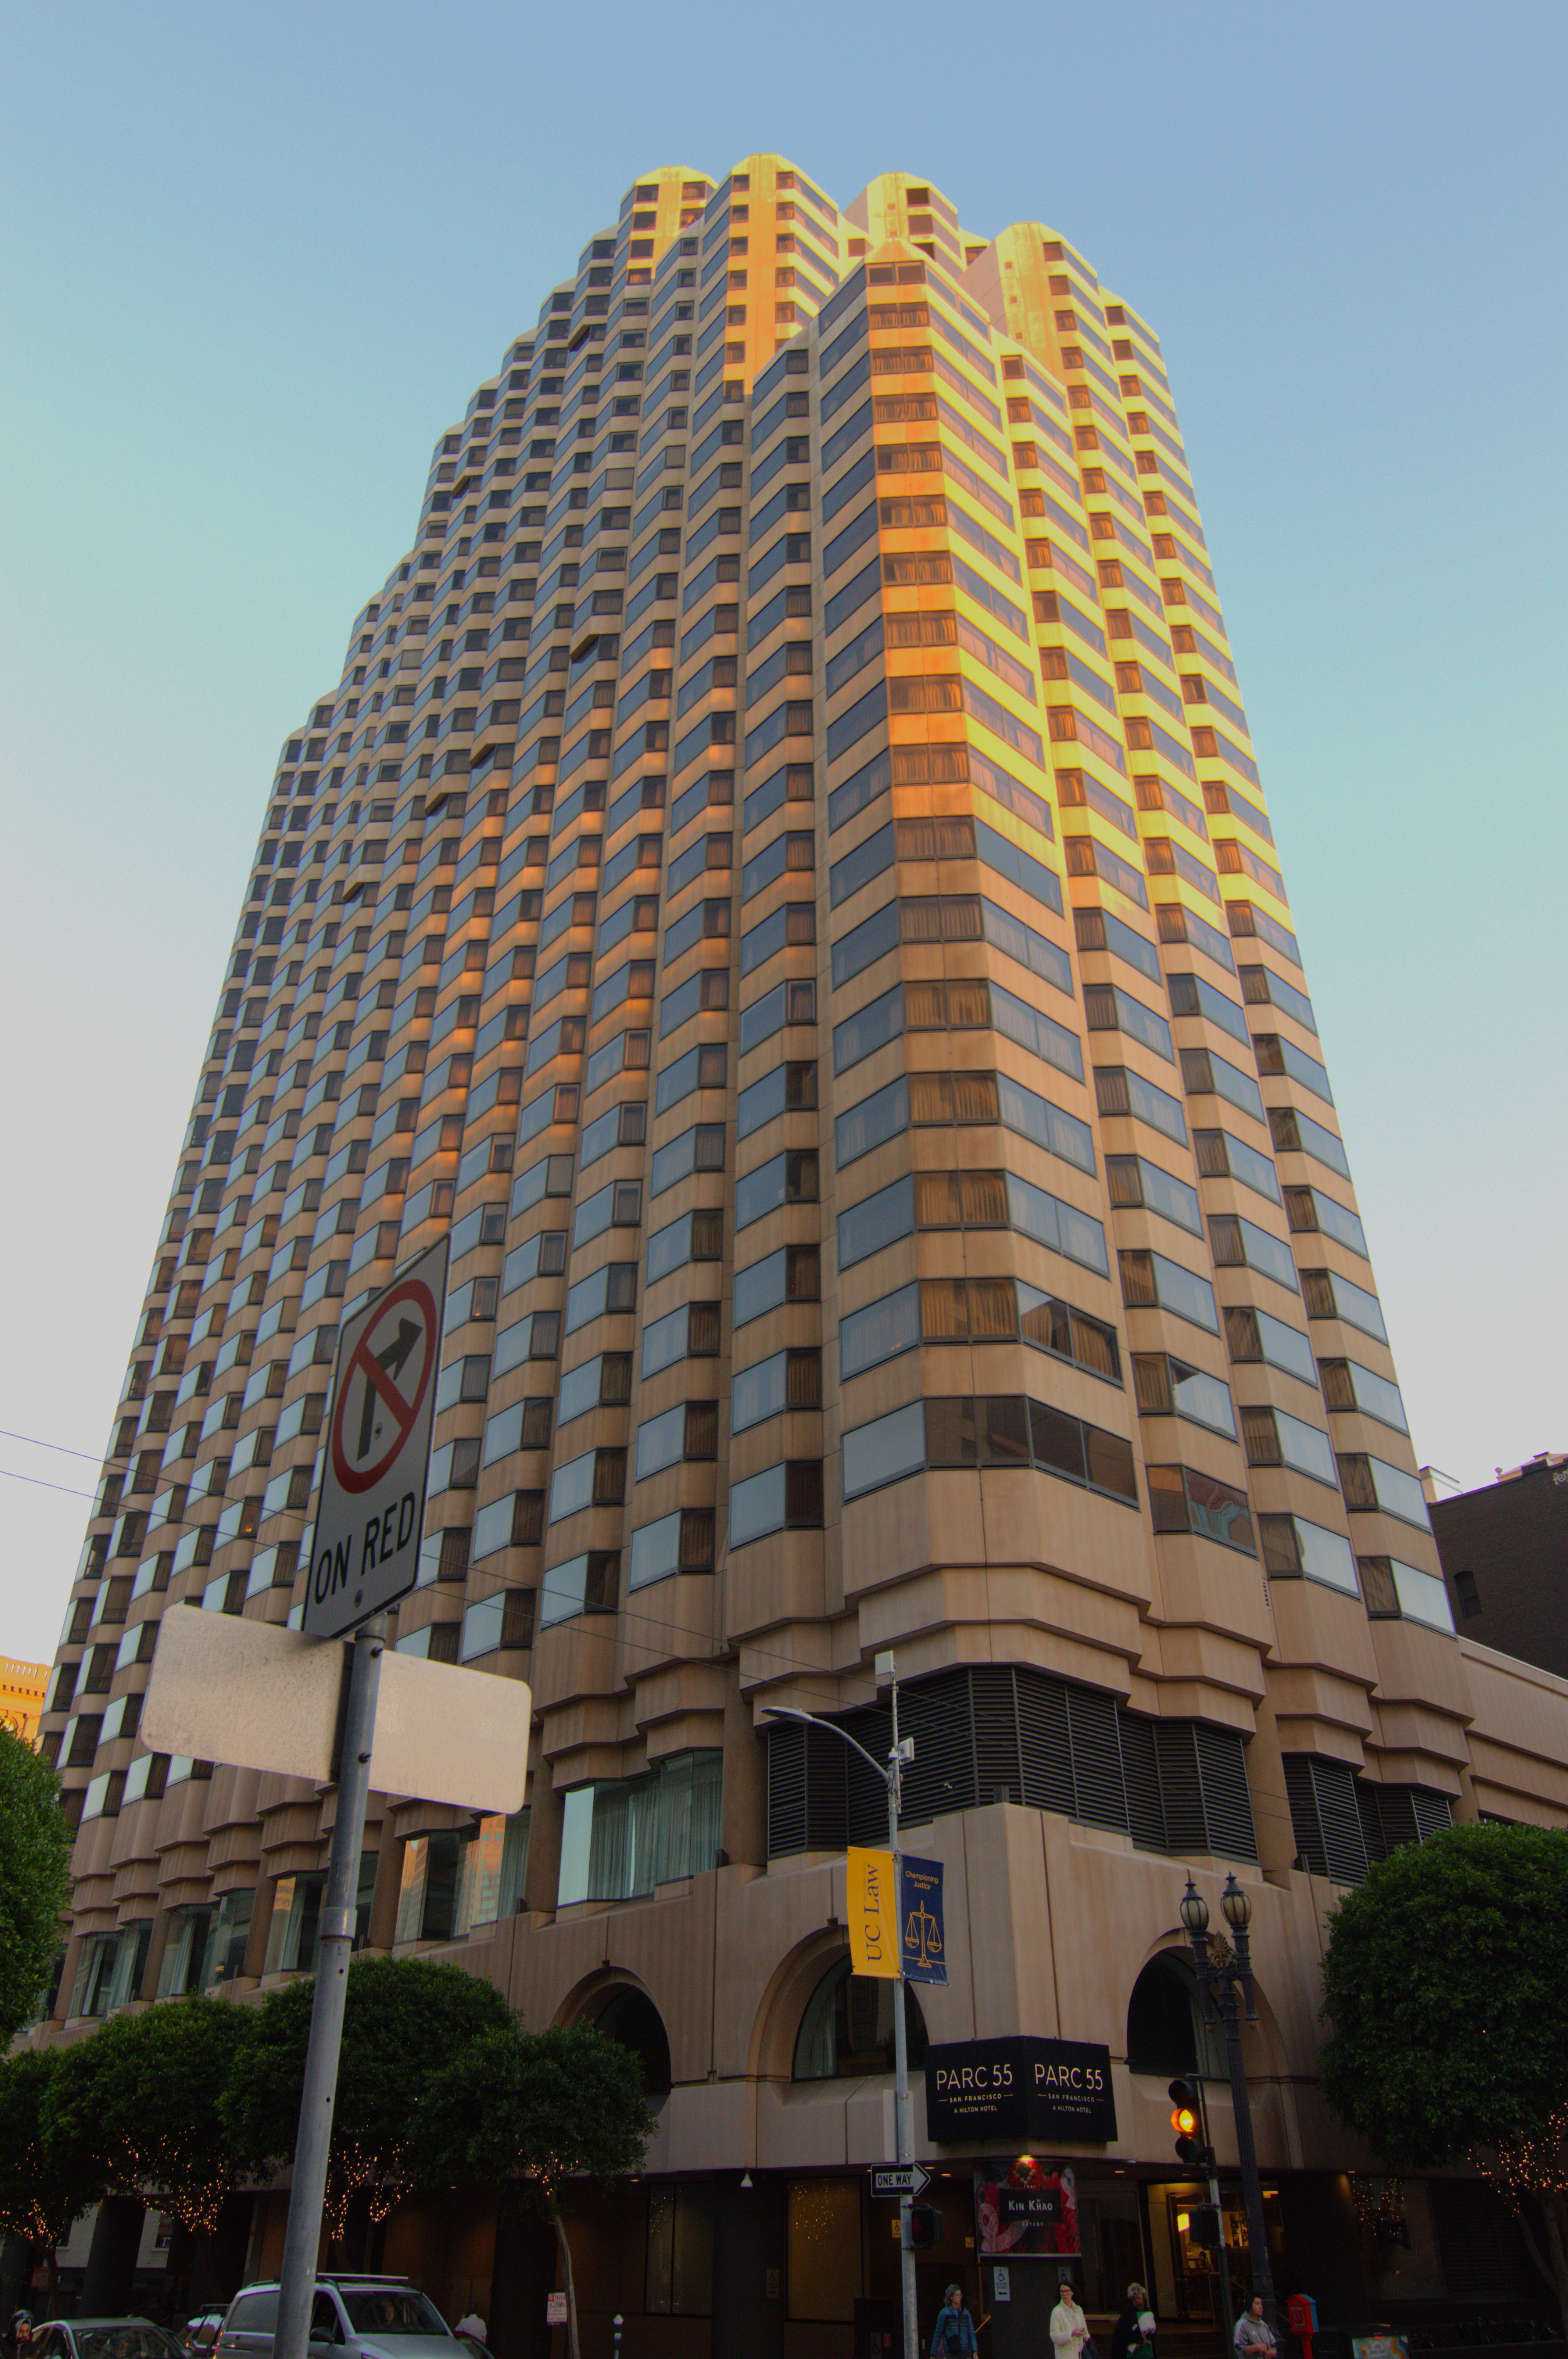 A large hotel building with the sun shining on its upper floors